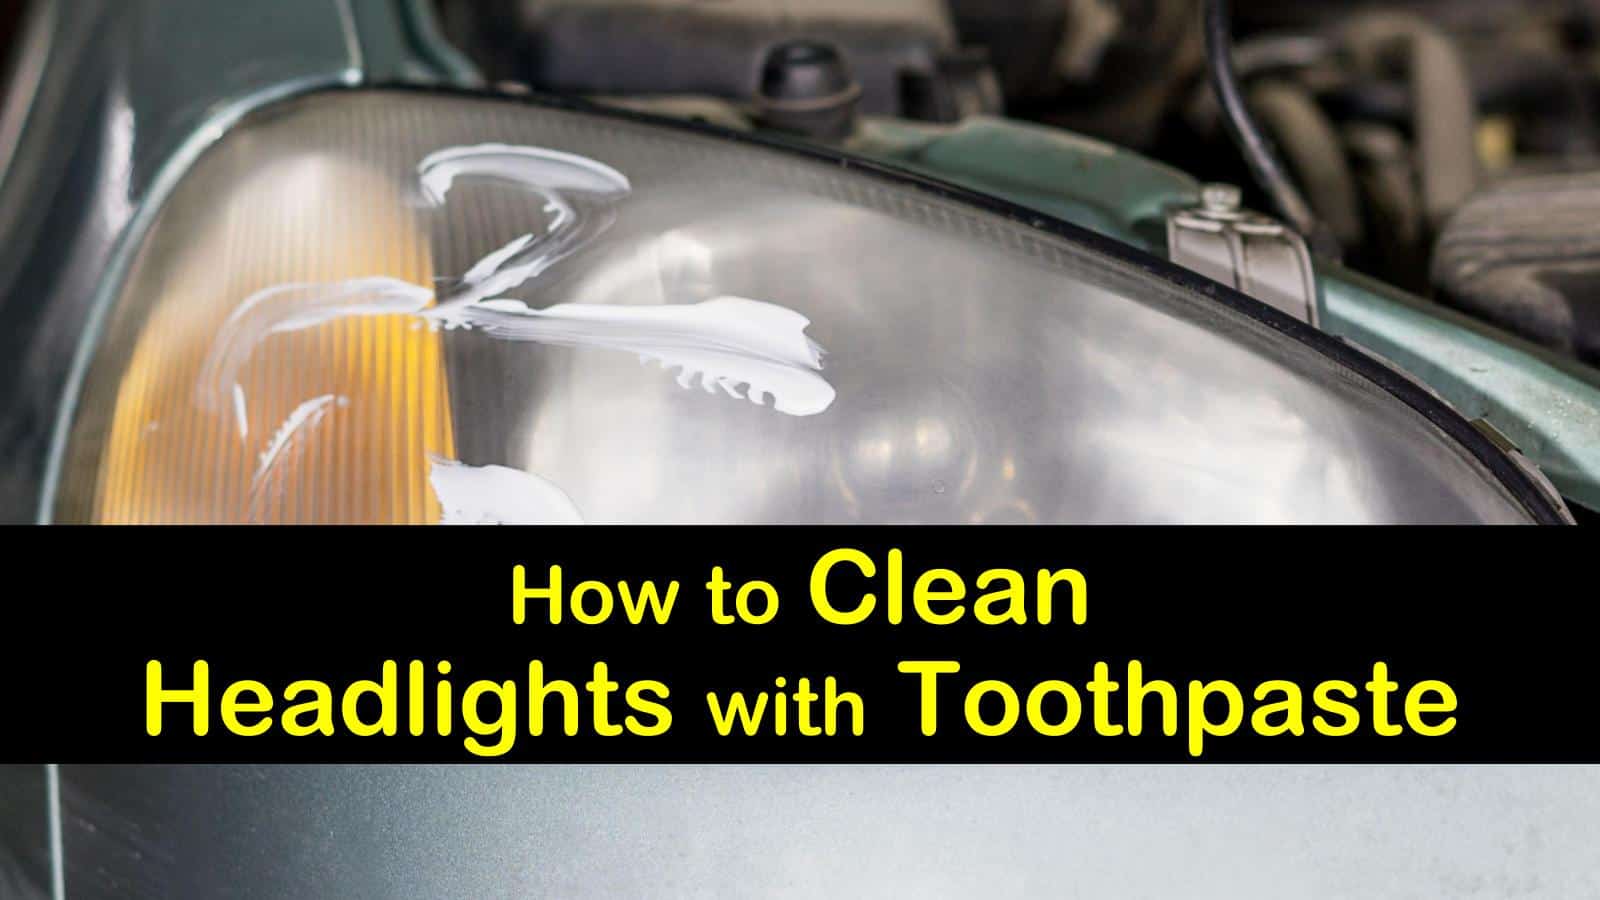 Hands-On Ways to Clean Headlights with Toothpaste